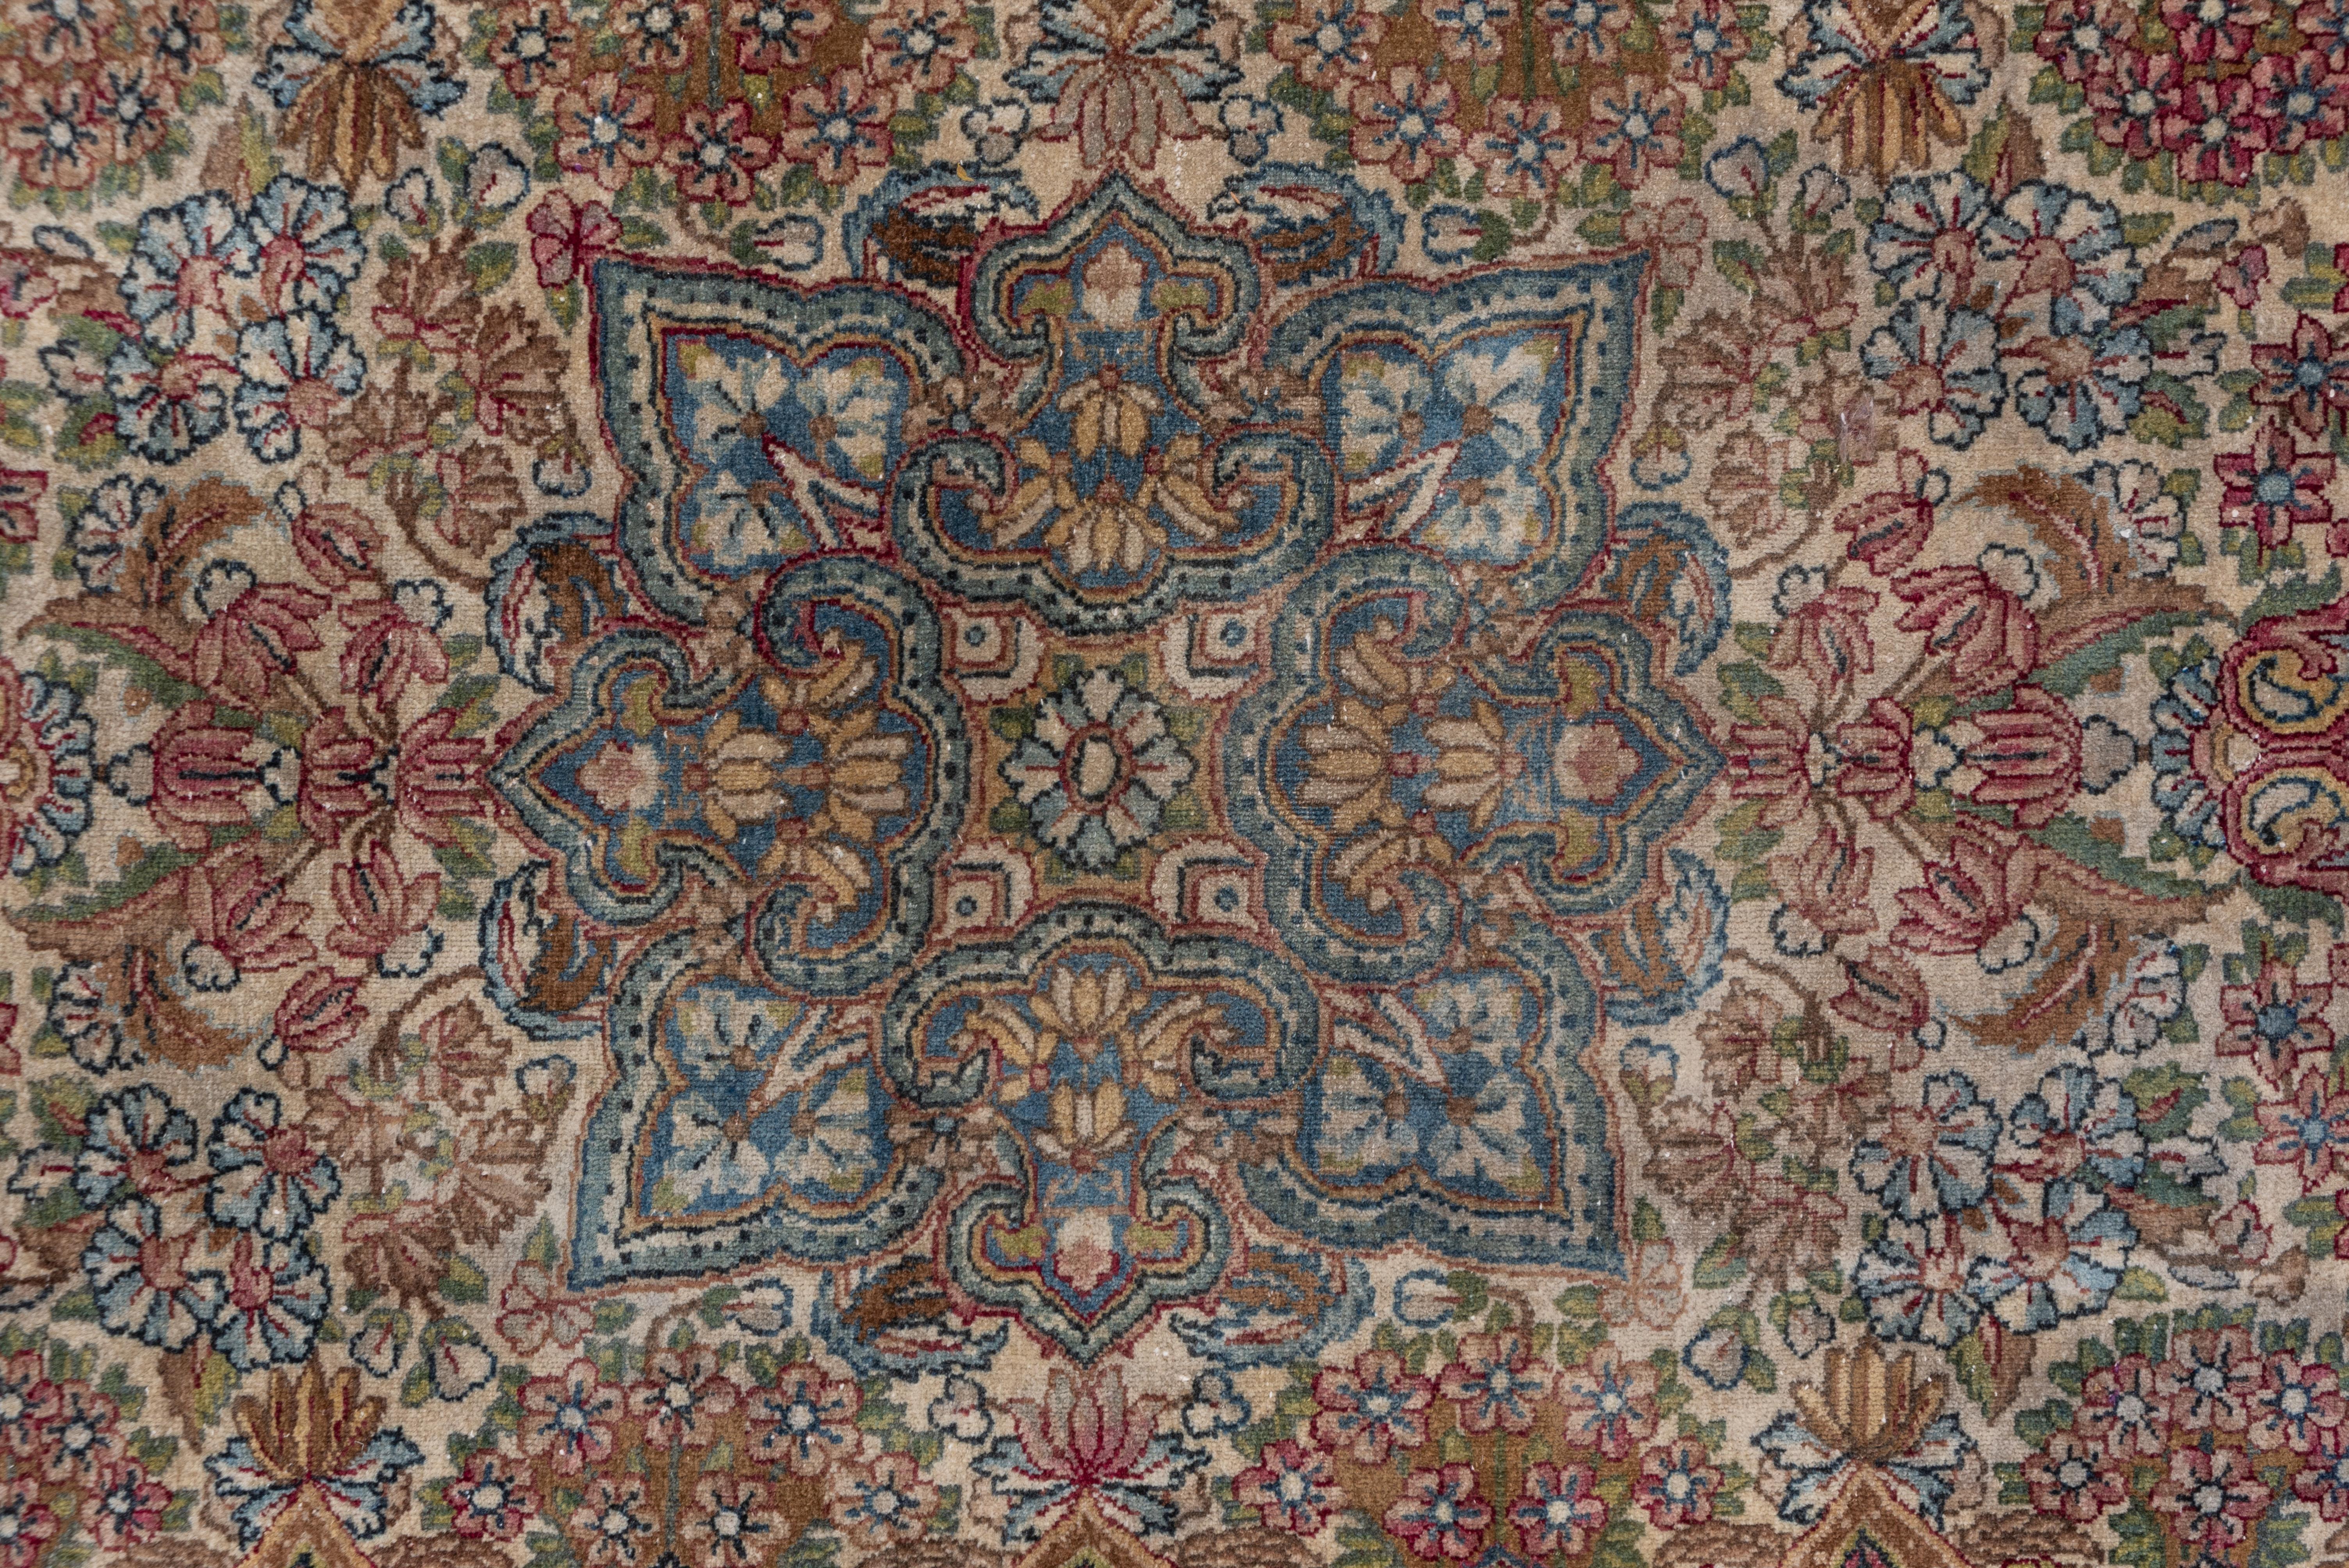 Early 20th Century Gorgeous Antique Persian Kerman Runner with Jewel Tones, circa 1920s